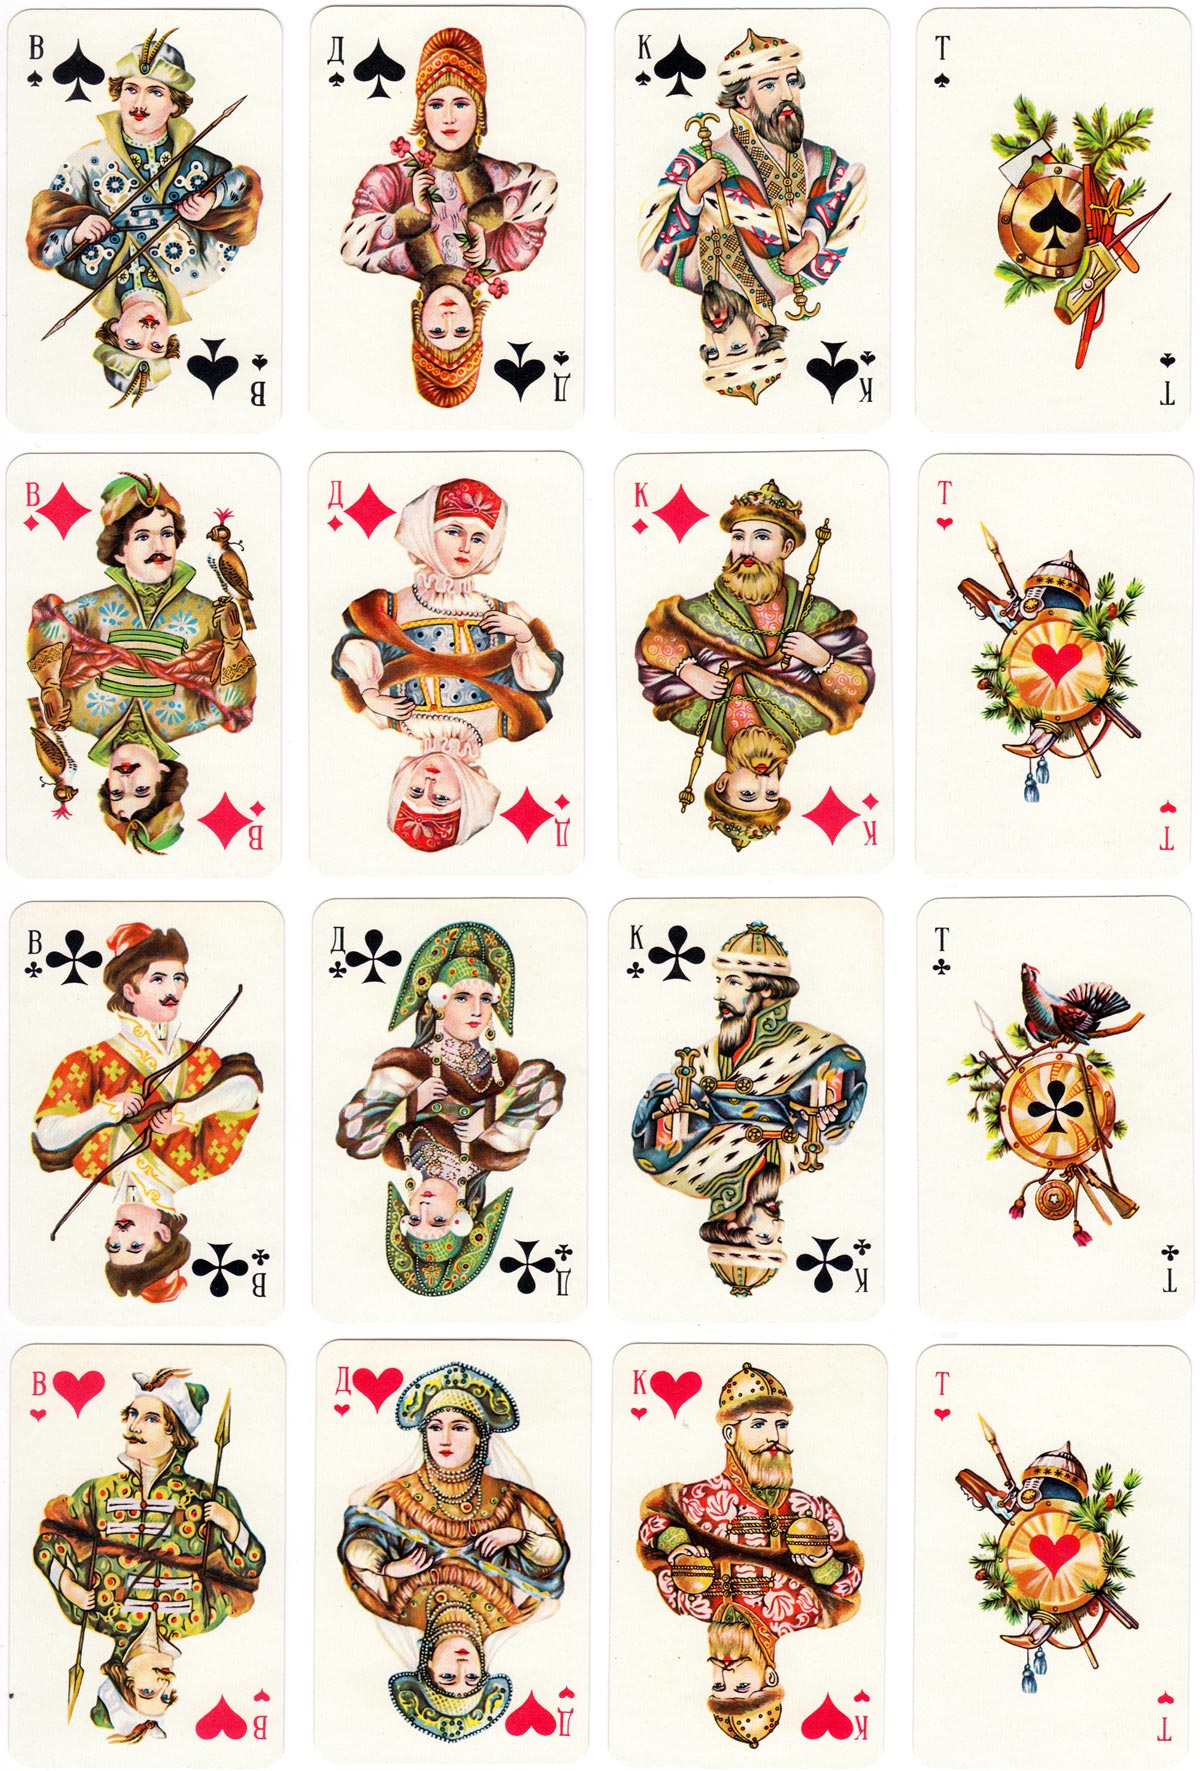 Traditional Russian style playing cards first published in 1911 by The Colour Printing Plant, St Petersburg